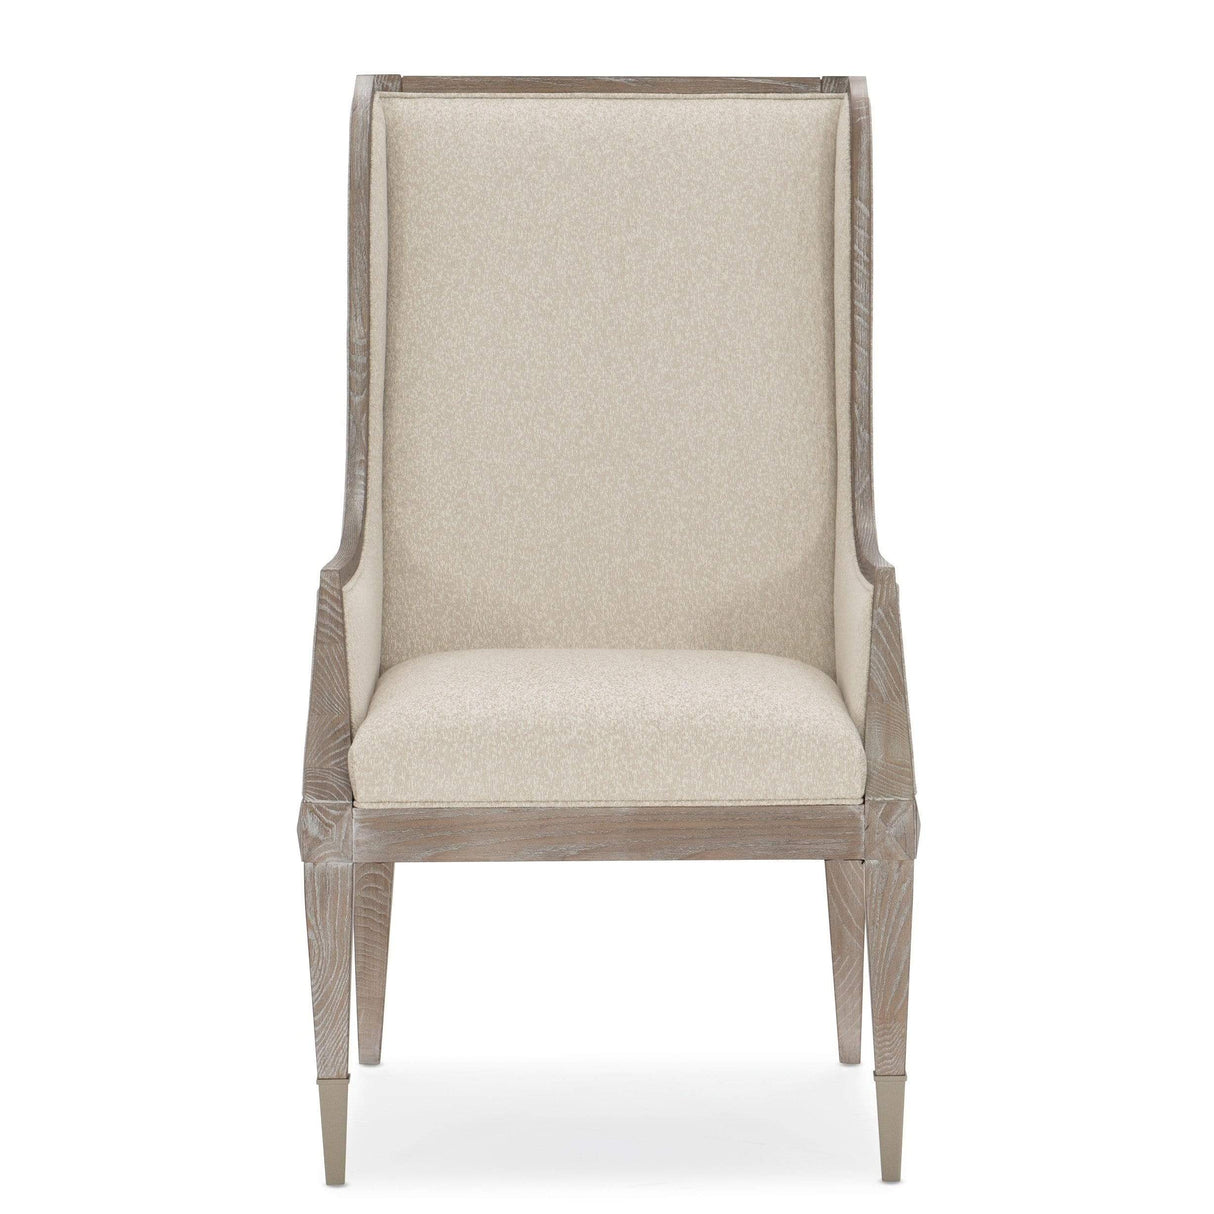 Caracole Open Arms Arm Chair Furniture caracole-CLA-019-273